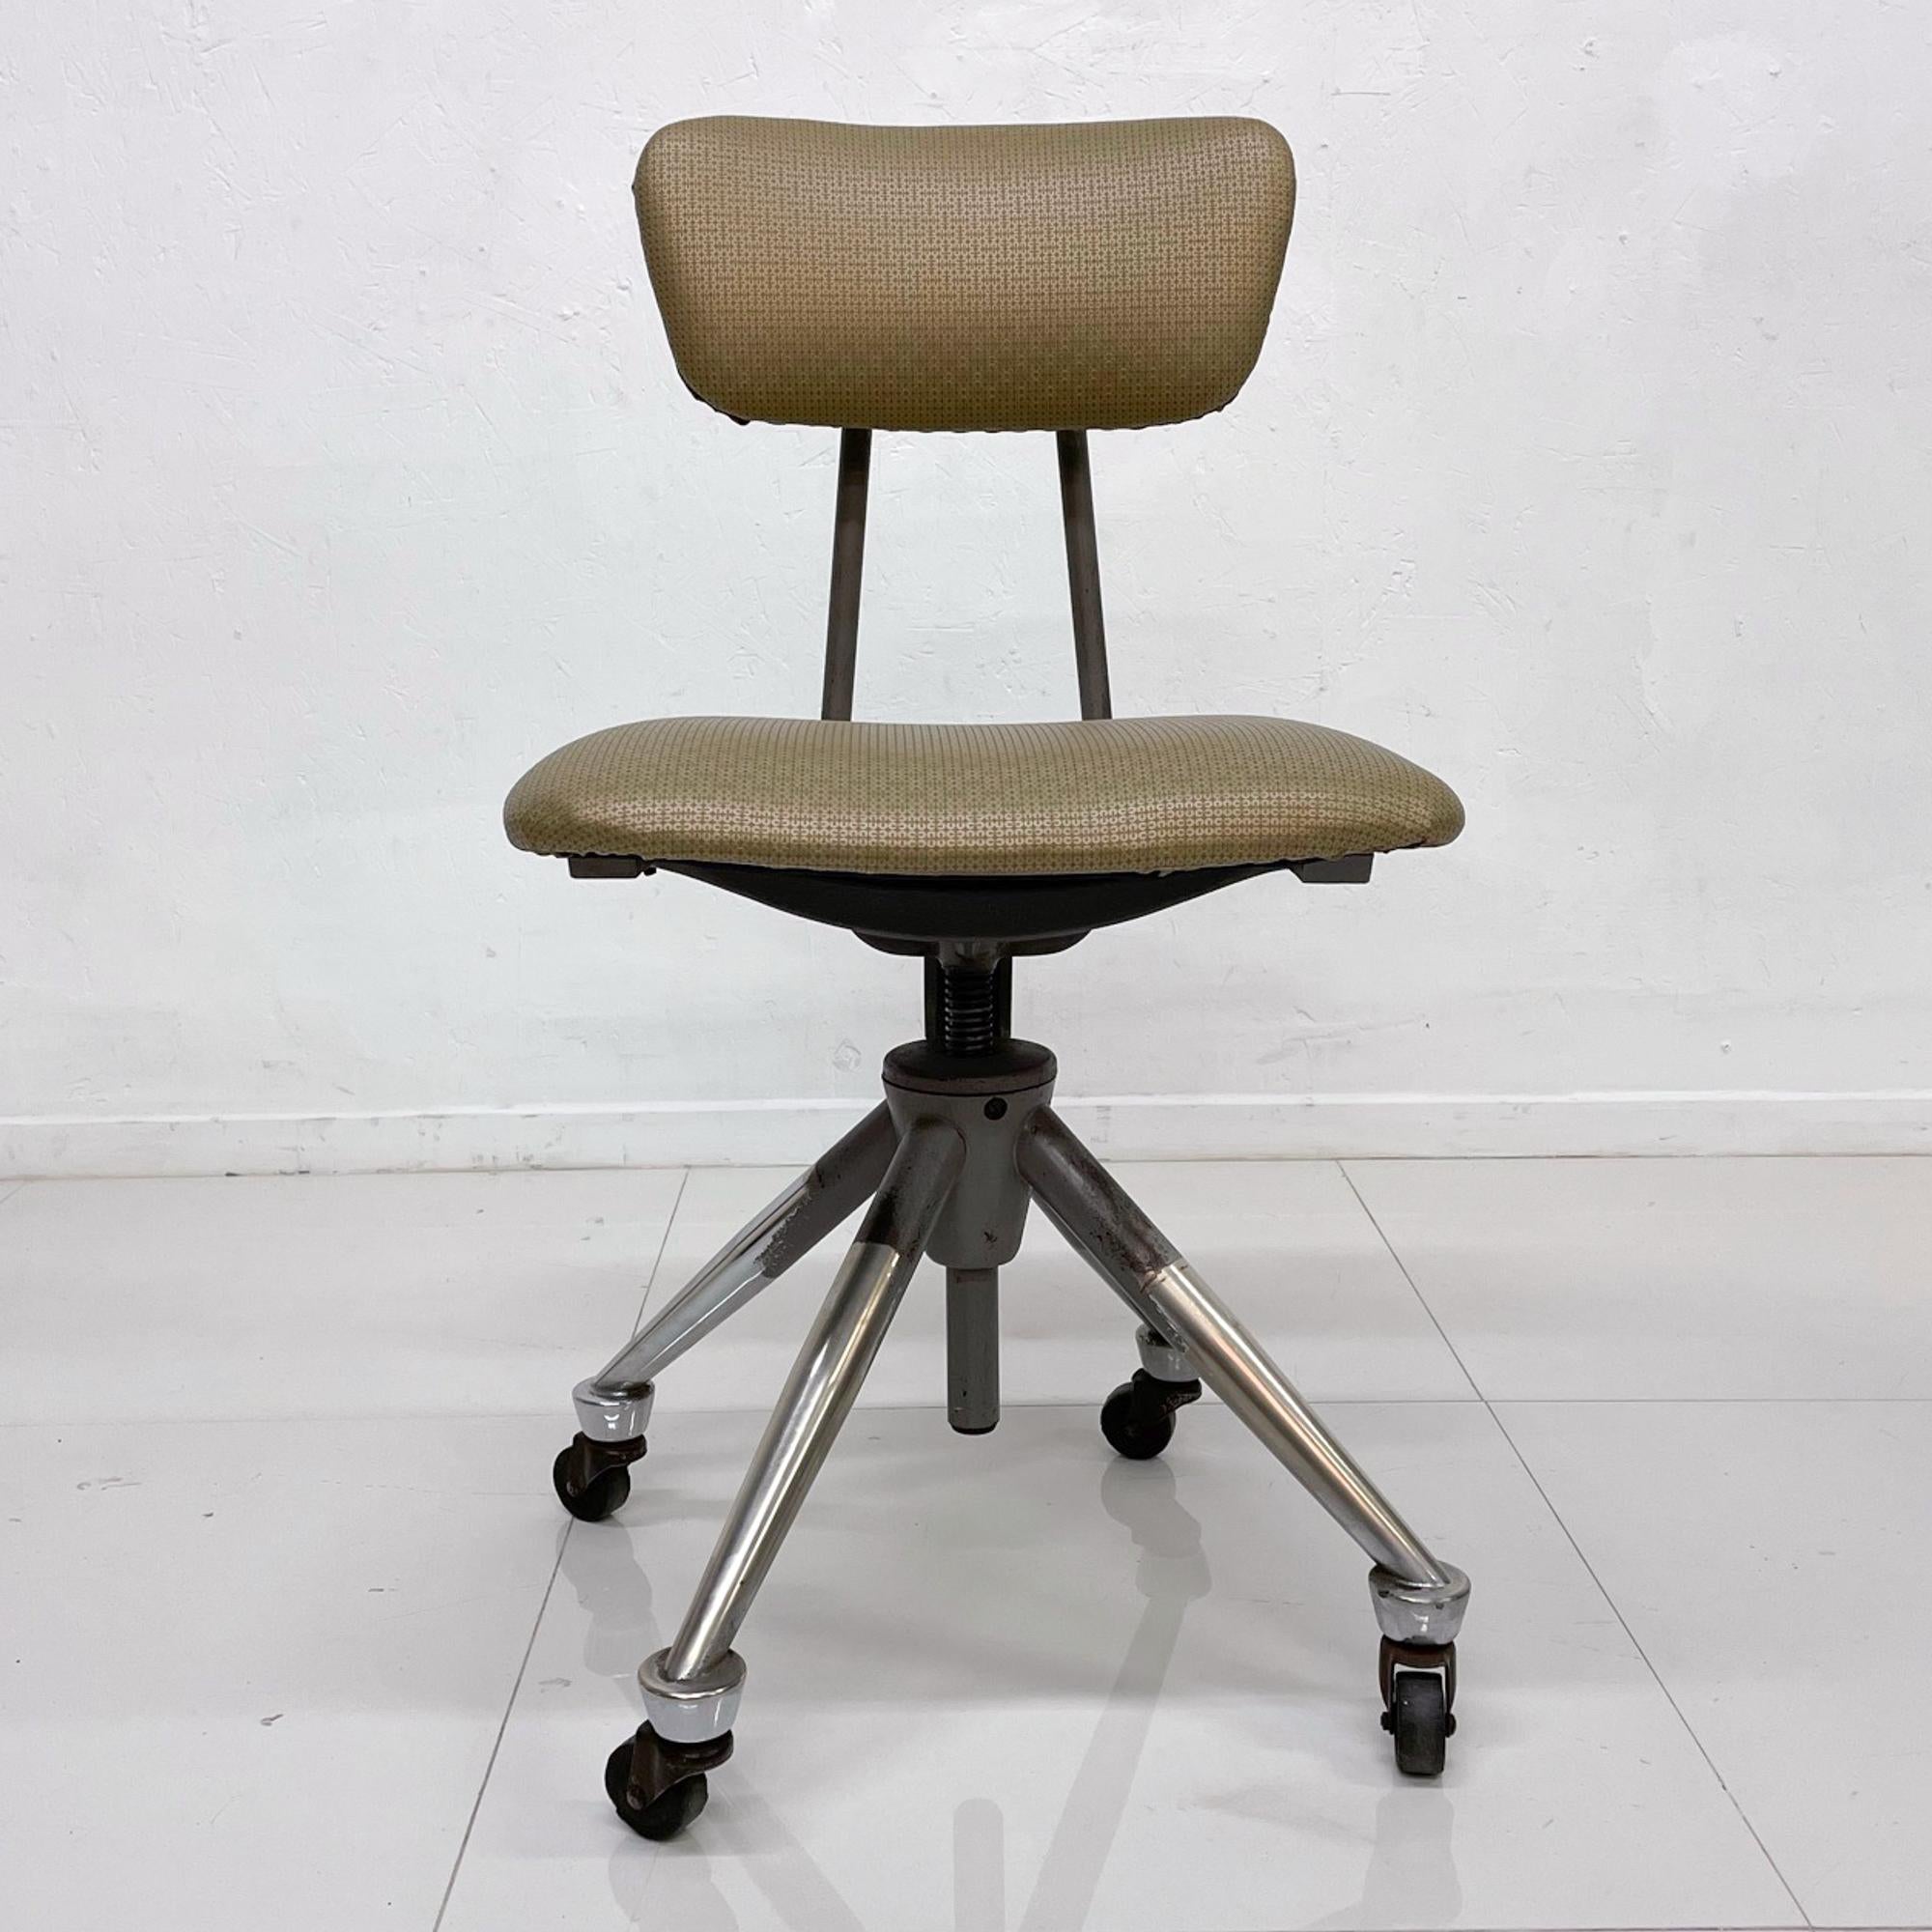 AMBIANIC presents
Do More Office Chair Mid-Century Modern industrial era.
Domore Chair Company, Inc. (also referred to as Do-More or Do/More) was founded in 1922 by William S. Ferris in Elkhart, Indiana.
This amazing office chair was made in the USA